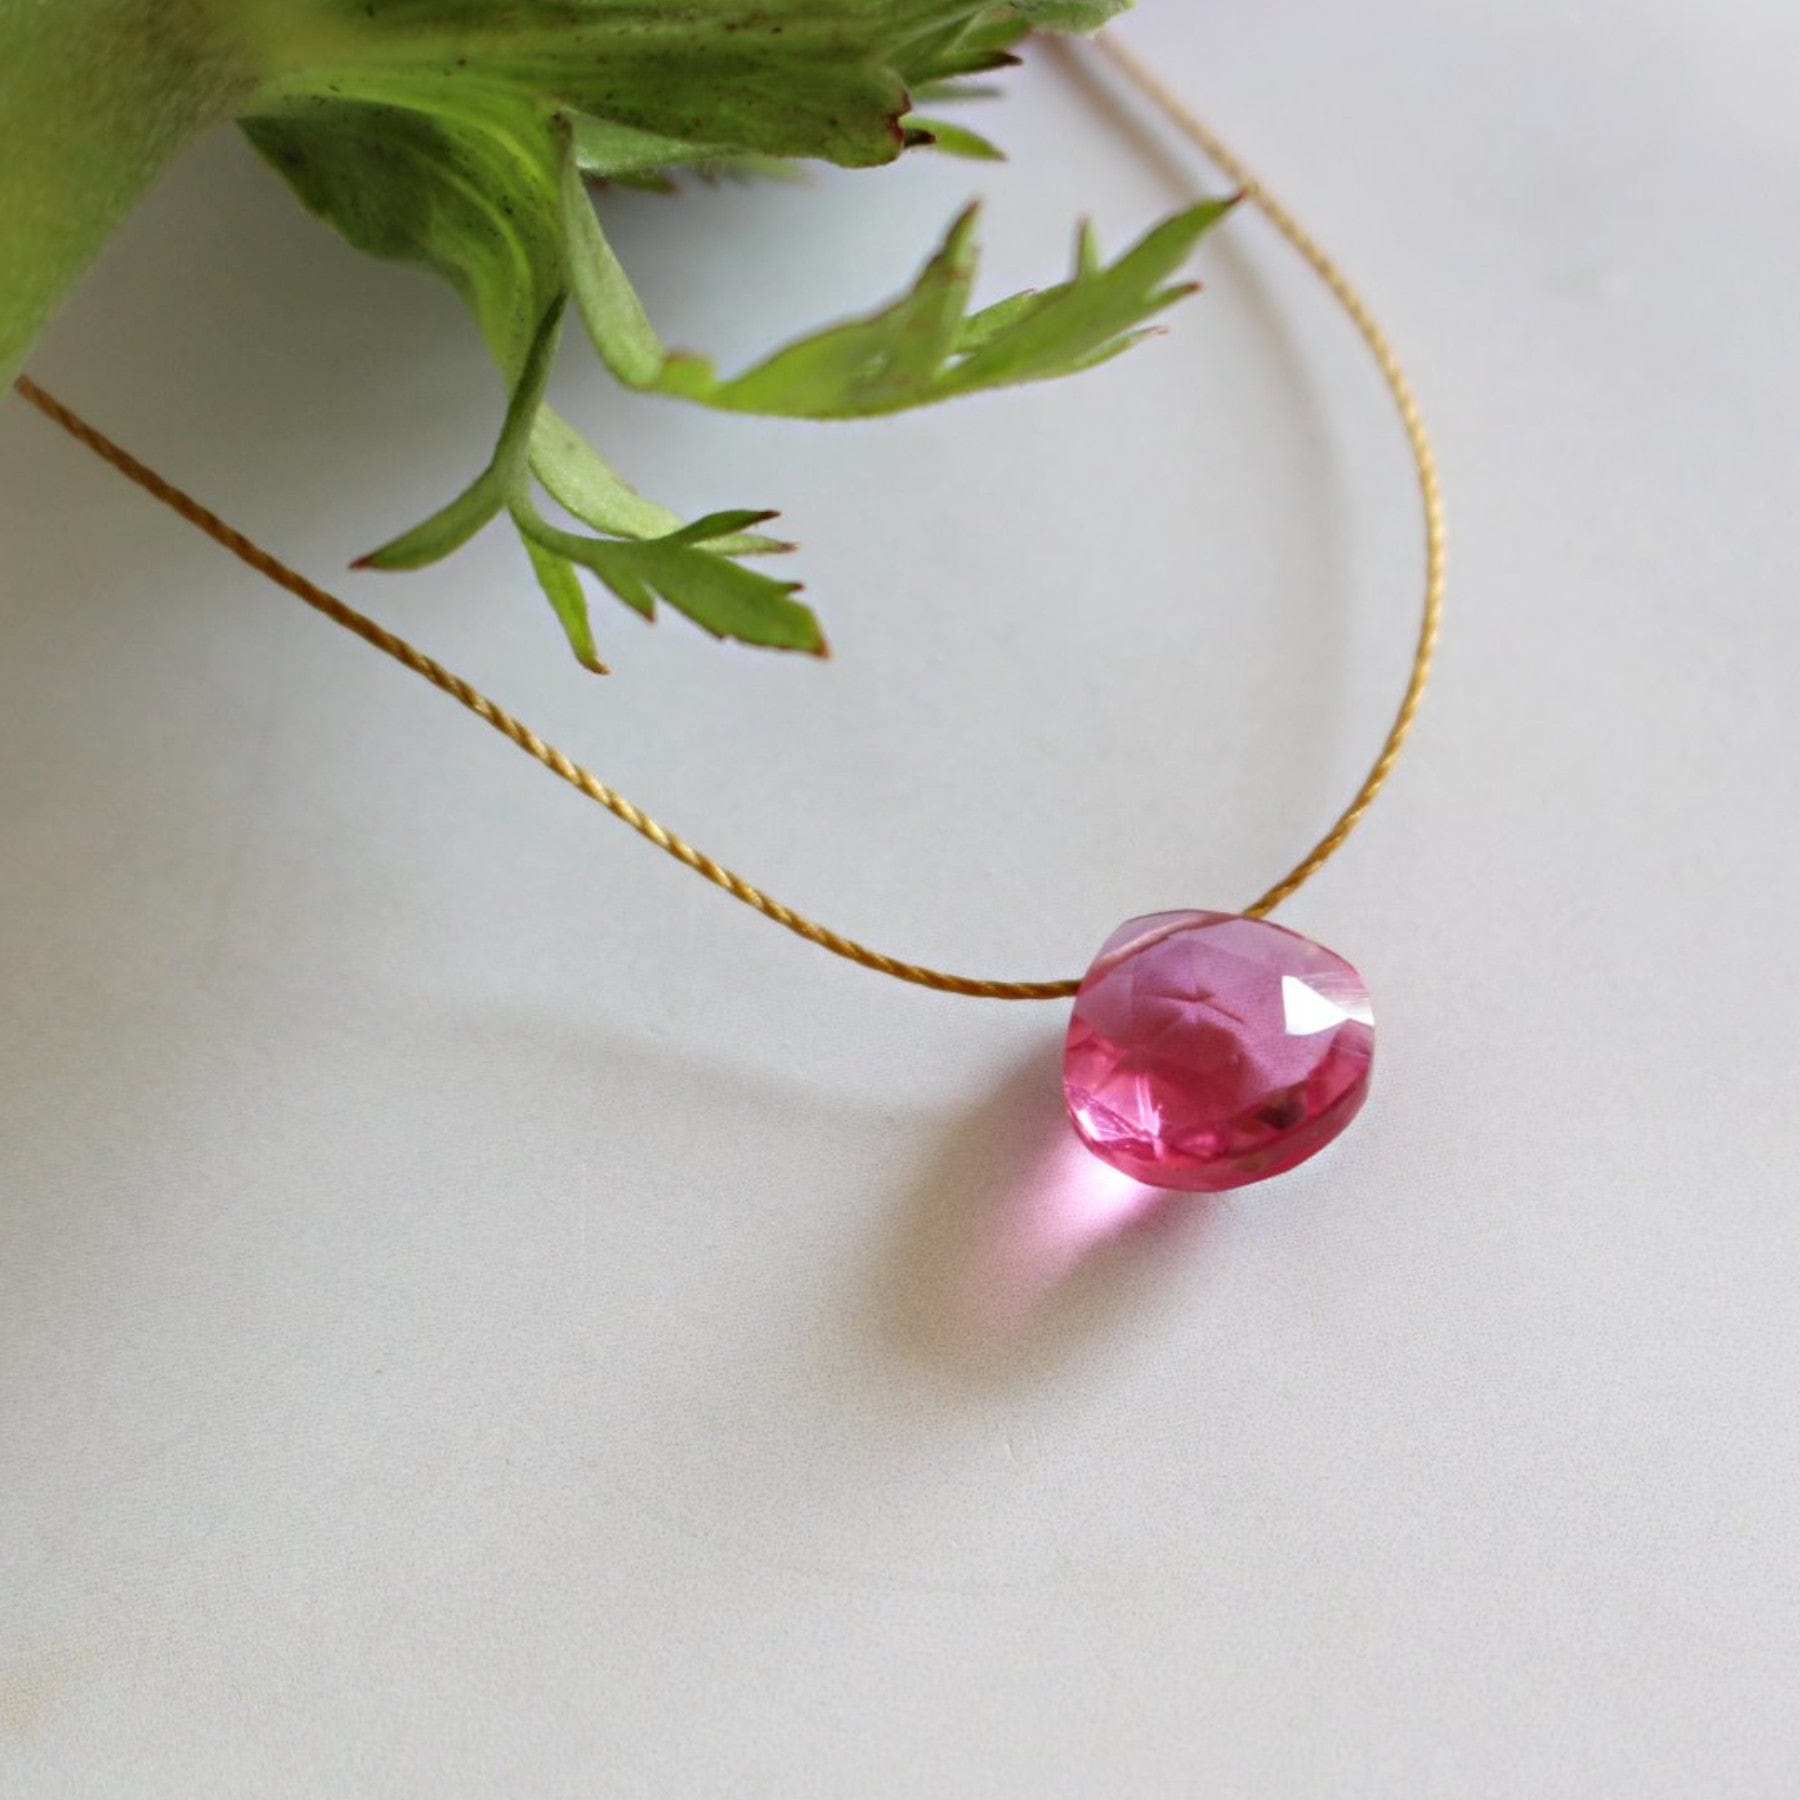 Pink gemstone pendant on gold chain next to green leafy plant on white background